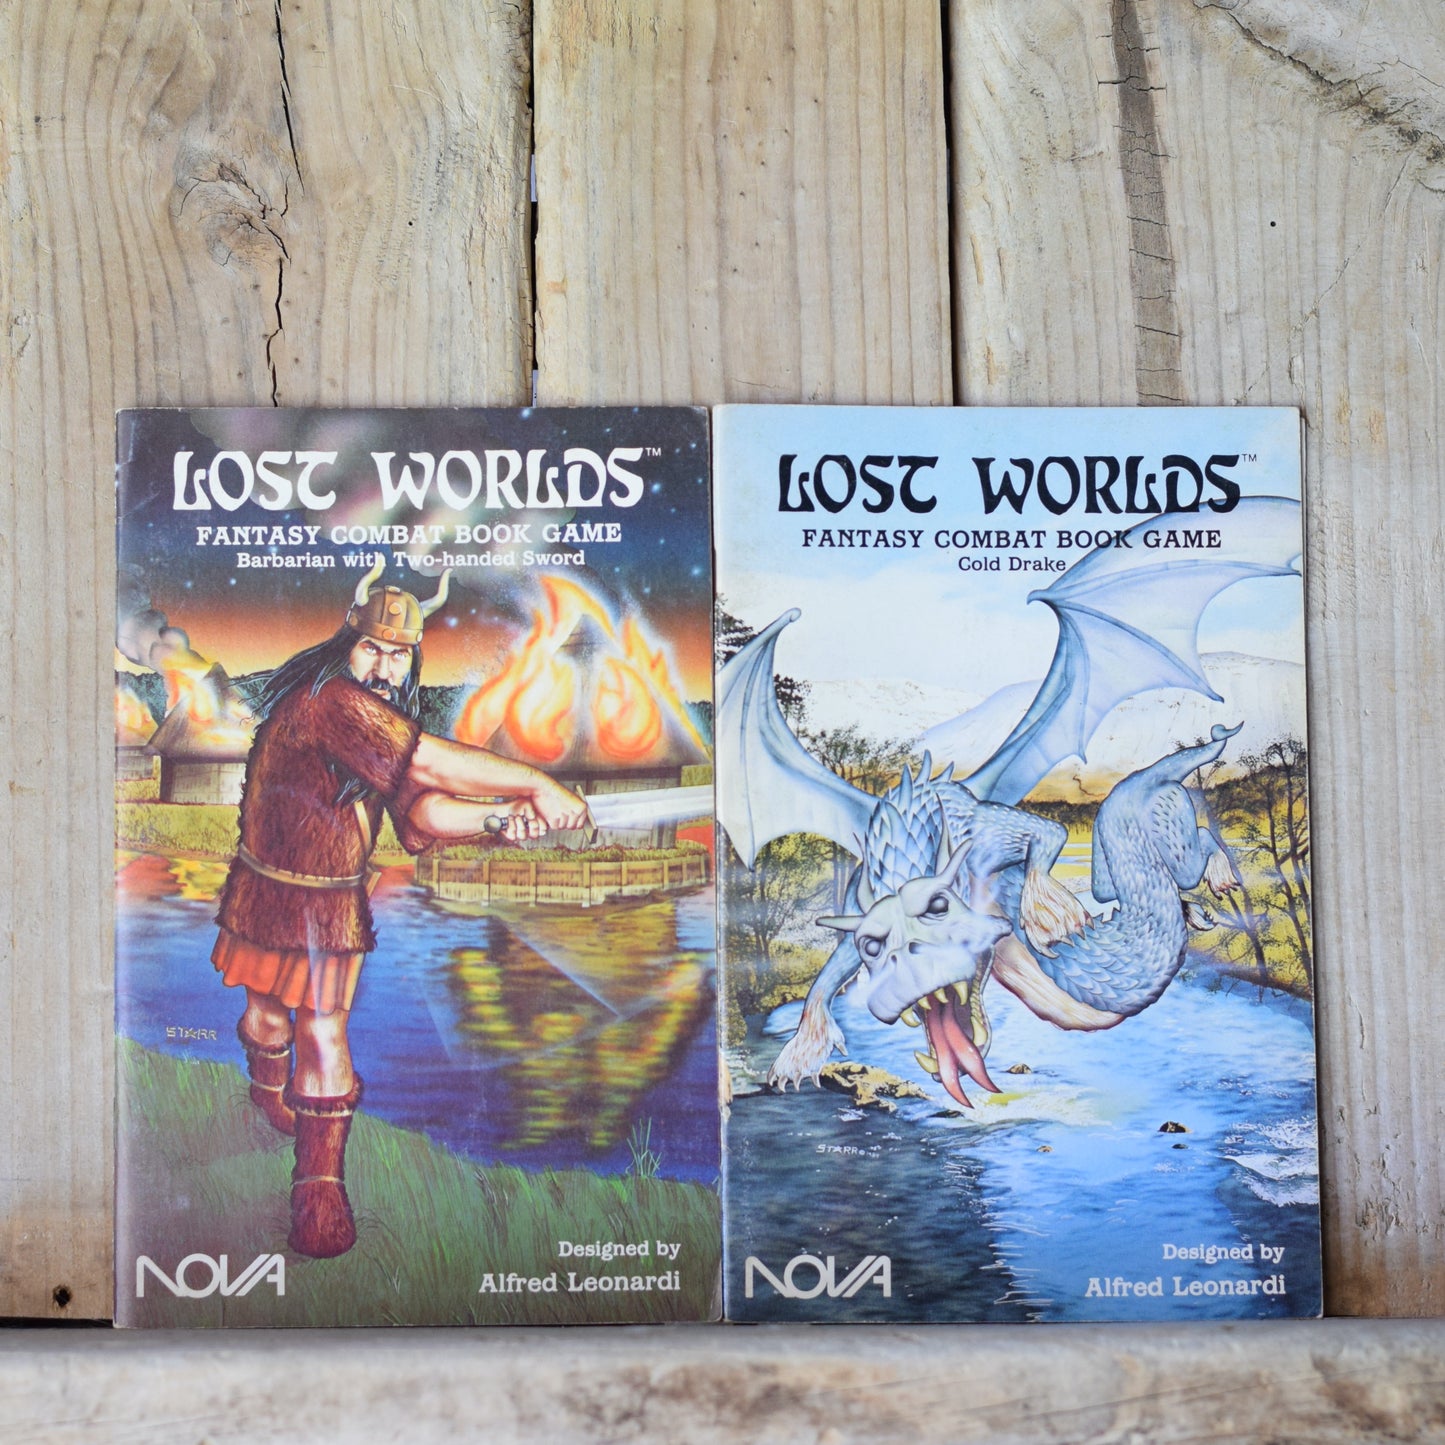 Vintage Gamebooks: Lot of 16 Lost Worlds Combat Books by Alfred Leonardi